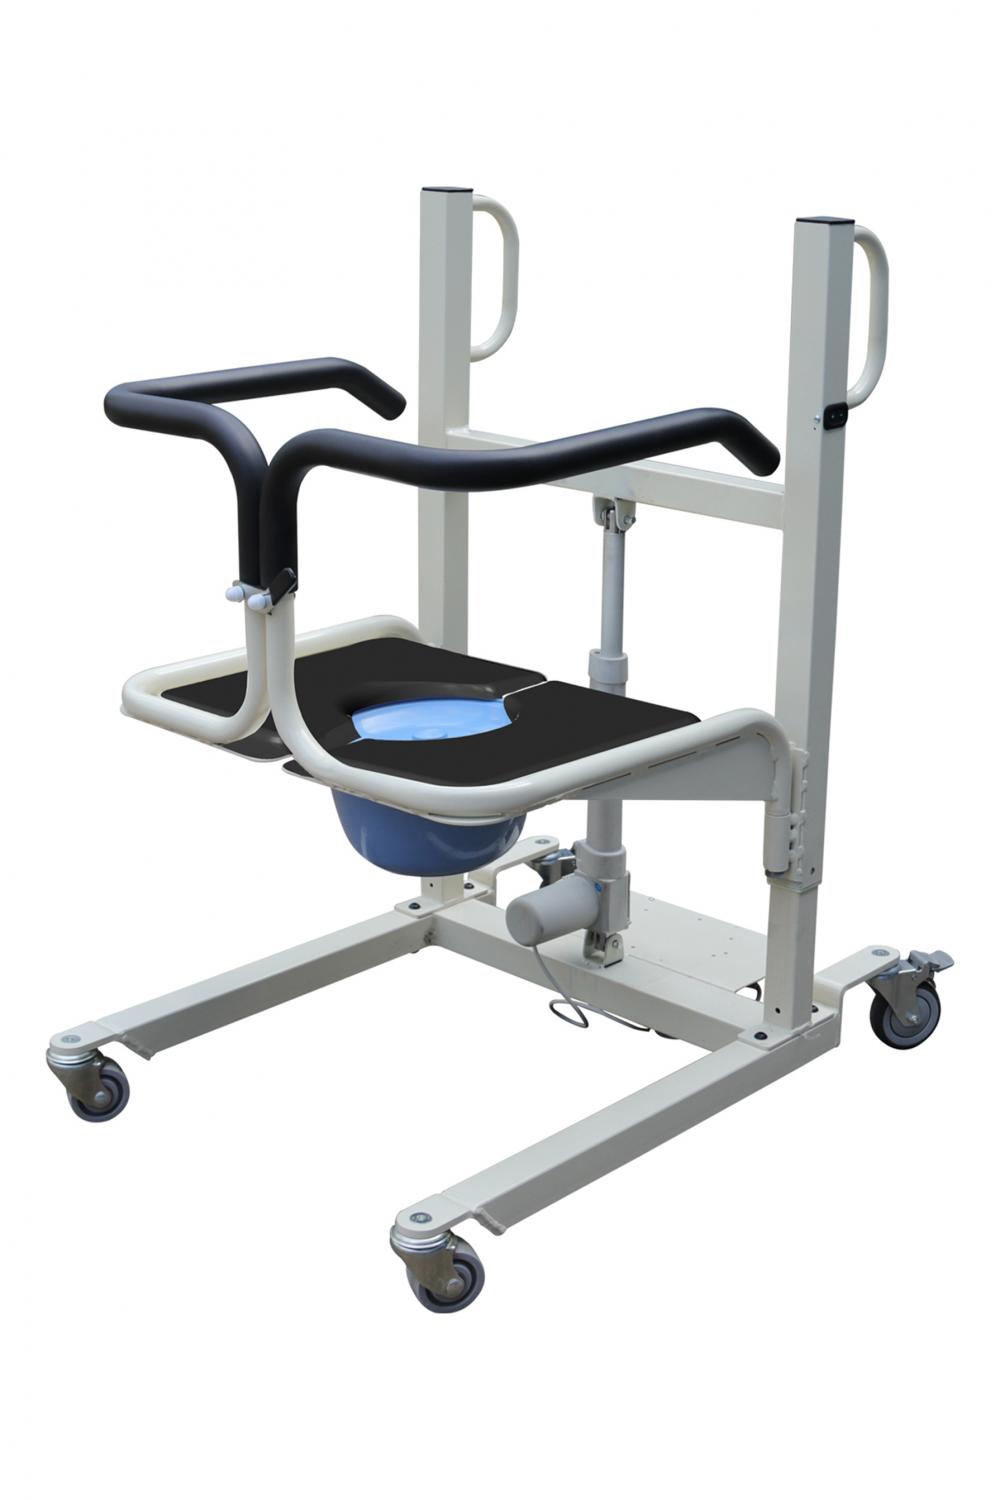 Mobile Lifts for the Disabled and the Elderly